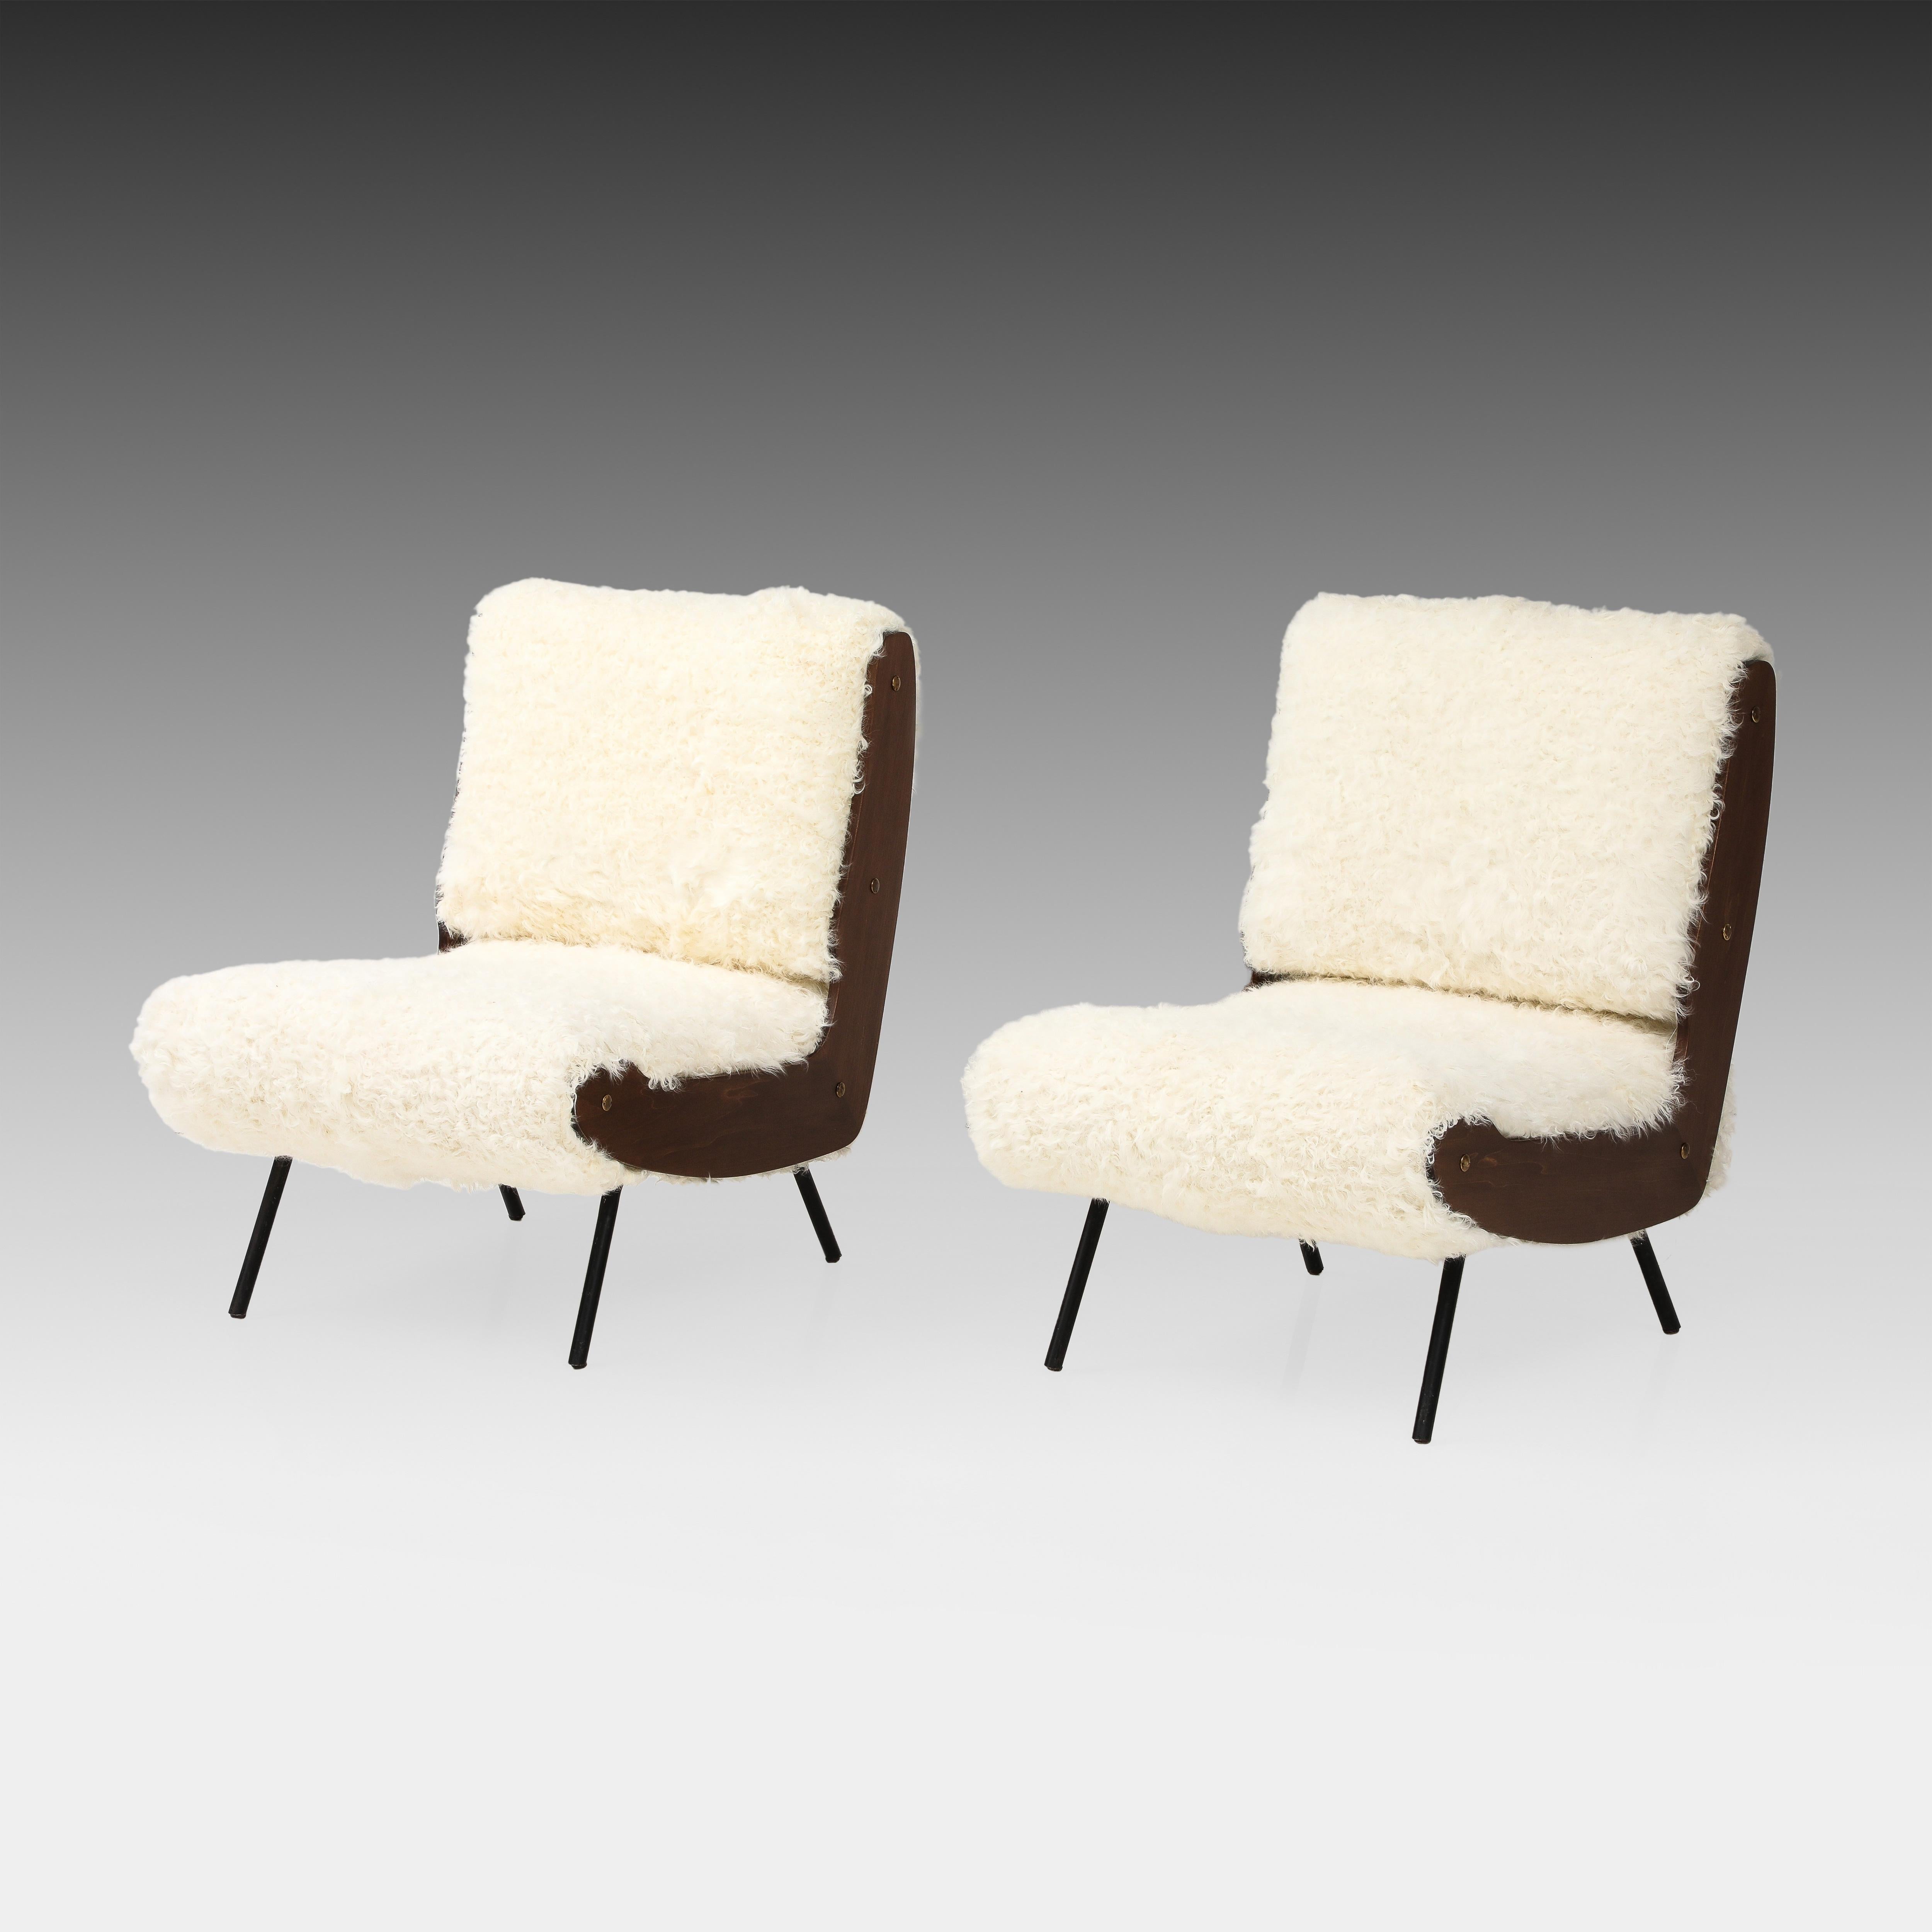 Gianfranco Frattini for Cassina rare pair of lounge chairs model 836 with walnut frames, black painted tubular metal legs, and back and seat cushions upholstered in a luxurious ivory or natural Kalgan lambskin or lamb fur.  These chic and iconic low